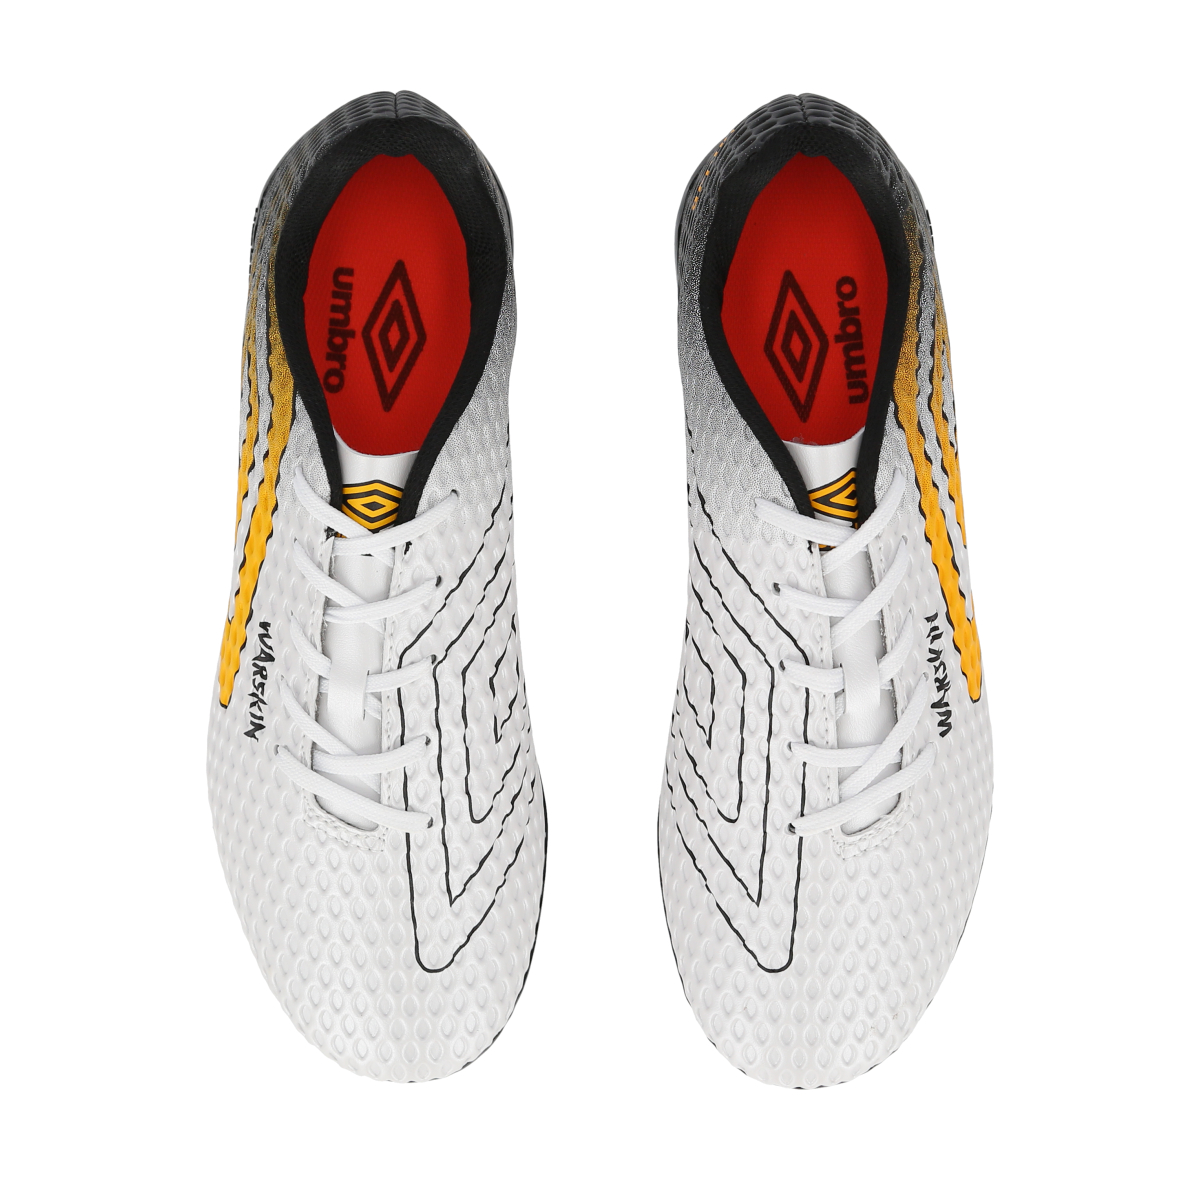 Botines Fútbol Umbro Warskin Campo Hombre,  image number null